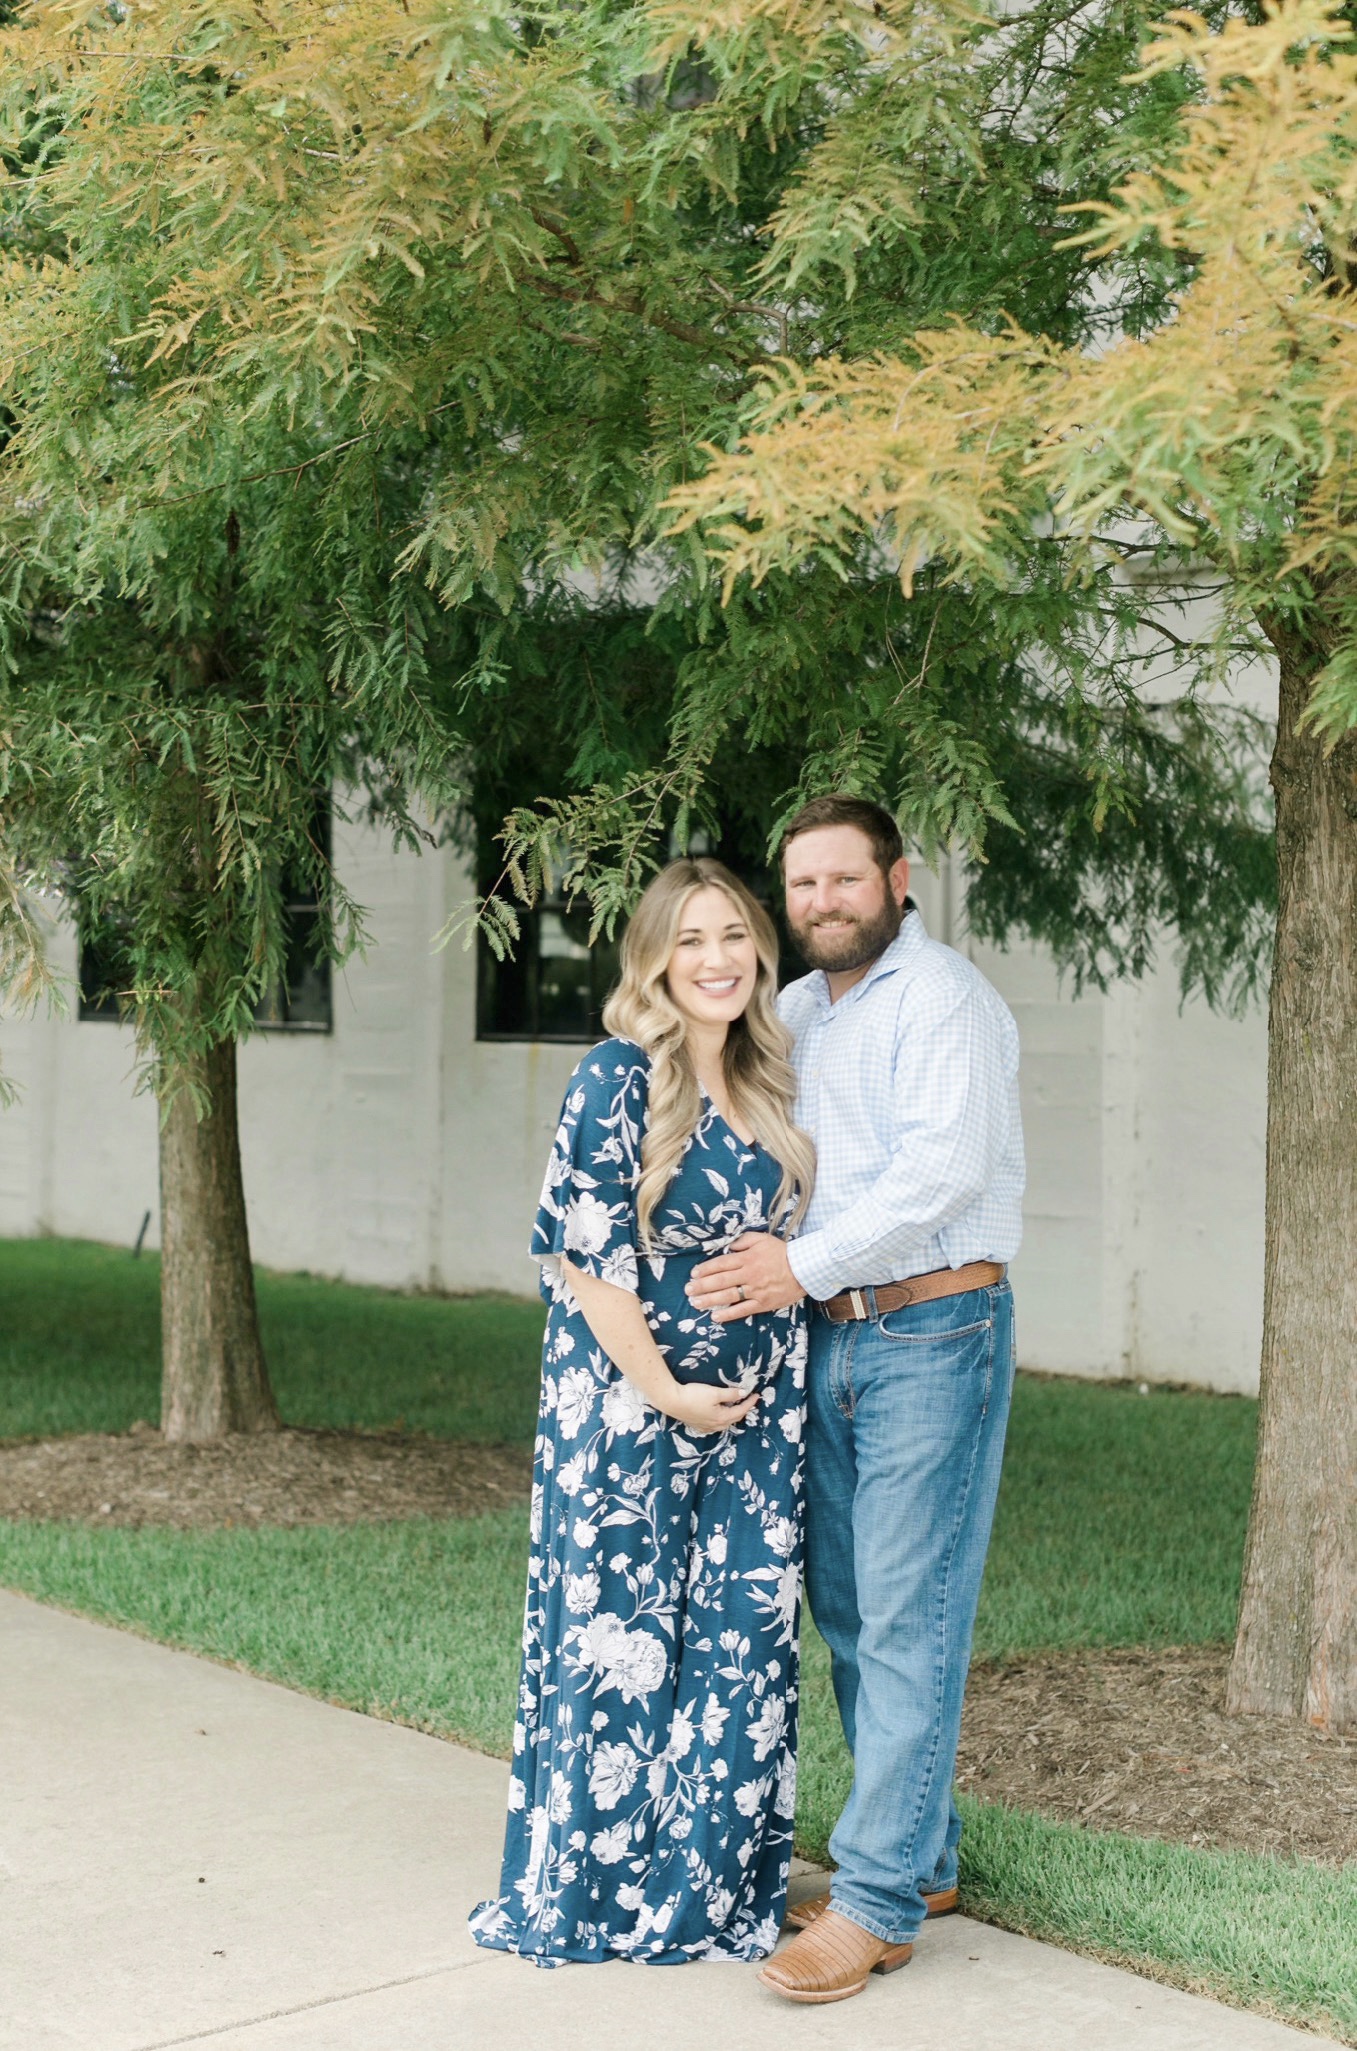 How to Prepare for a New Baby with Erie Insurance, tips featured by top Memphis lifestyle blogger, Walking in Memphis in High Heels.